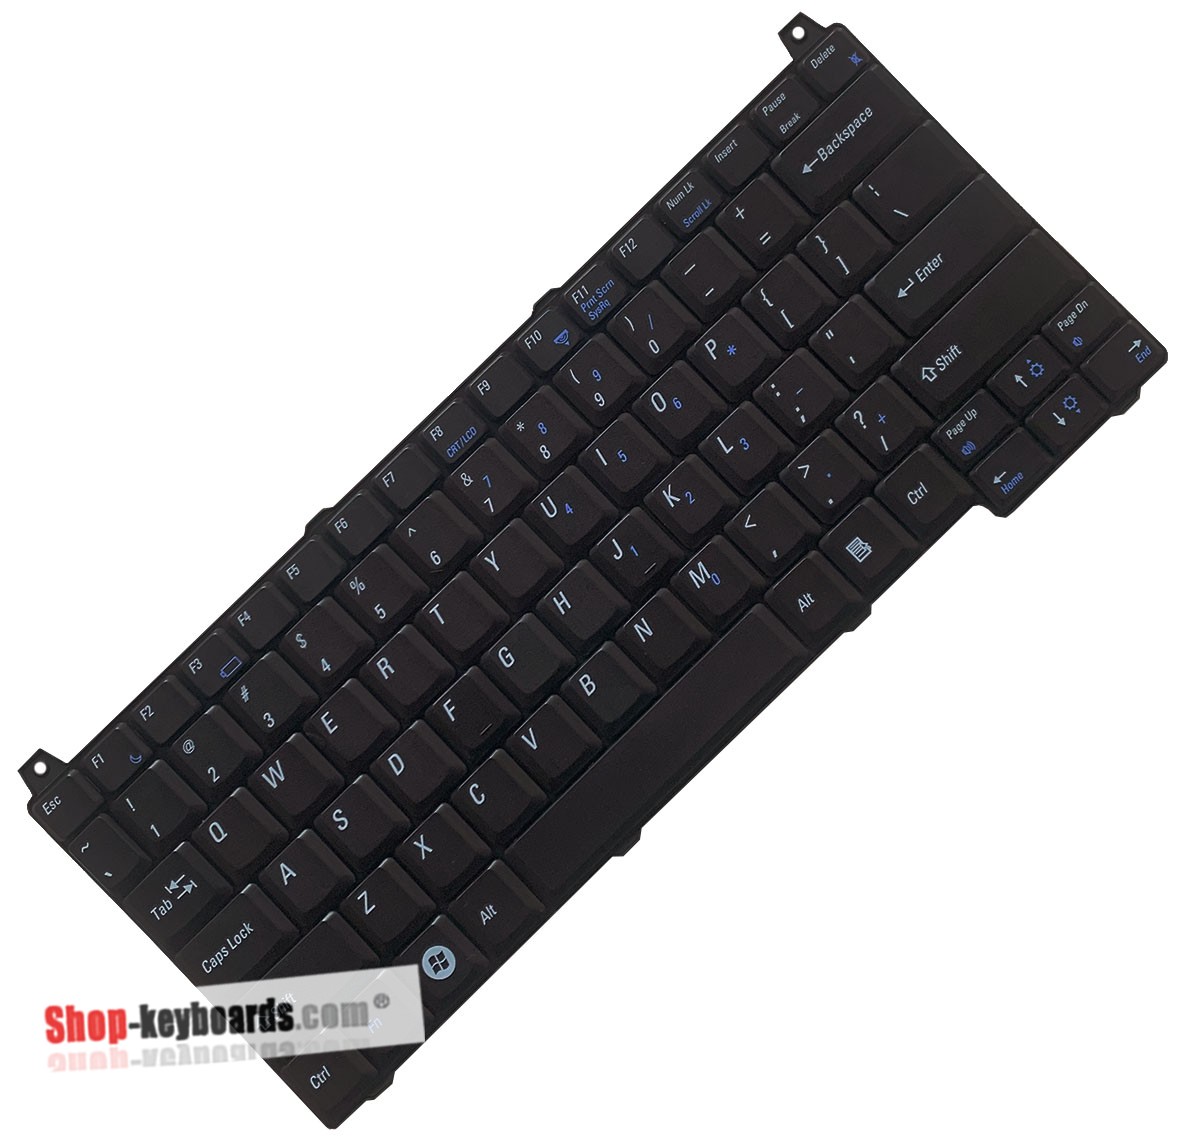 Dell Vostro v1310 Keyboard replacement